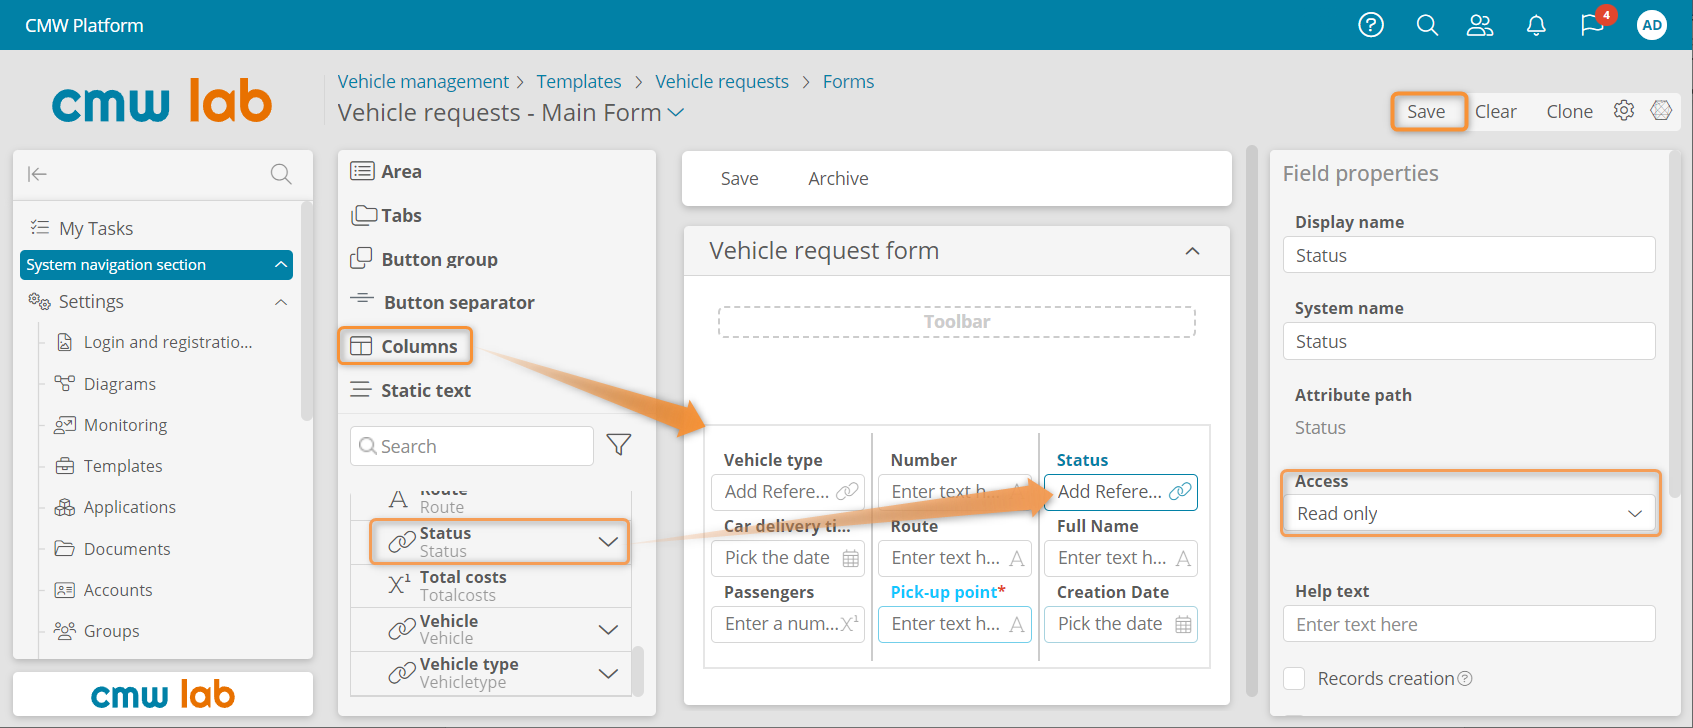 Adding the Status attribute to the vehicle request form